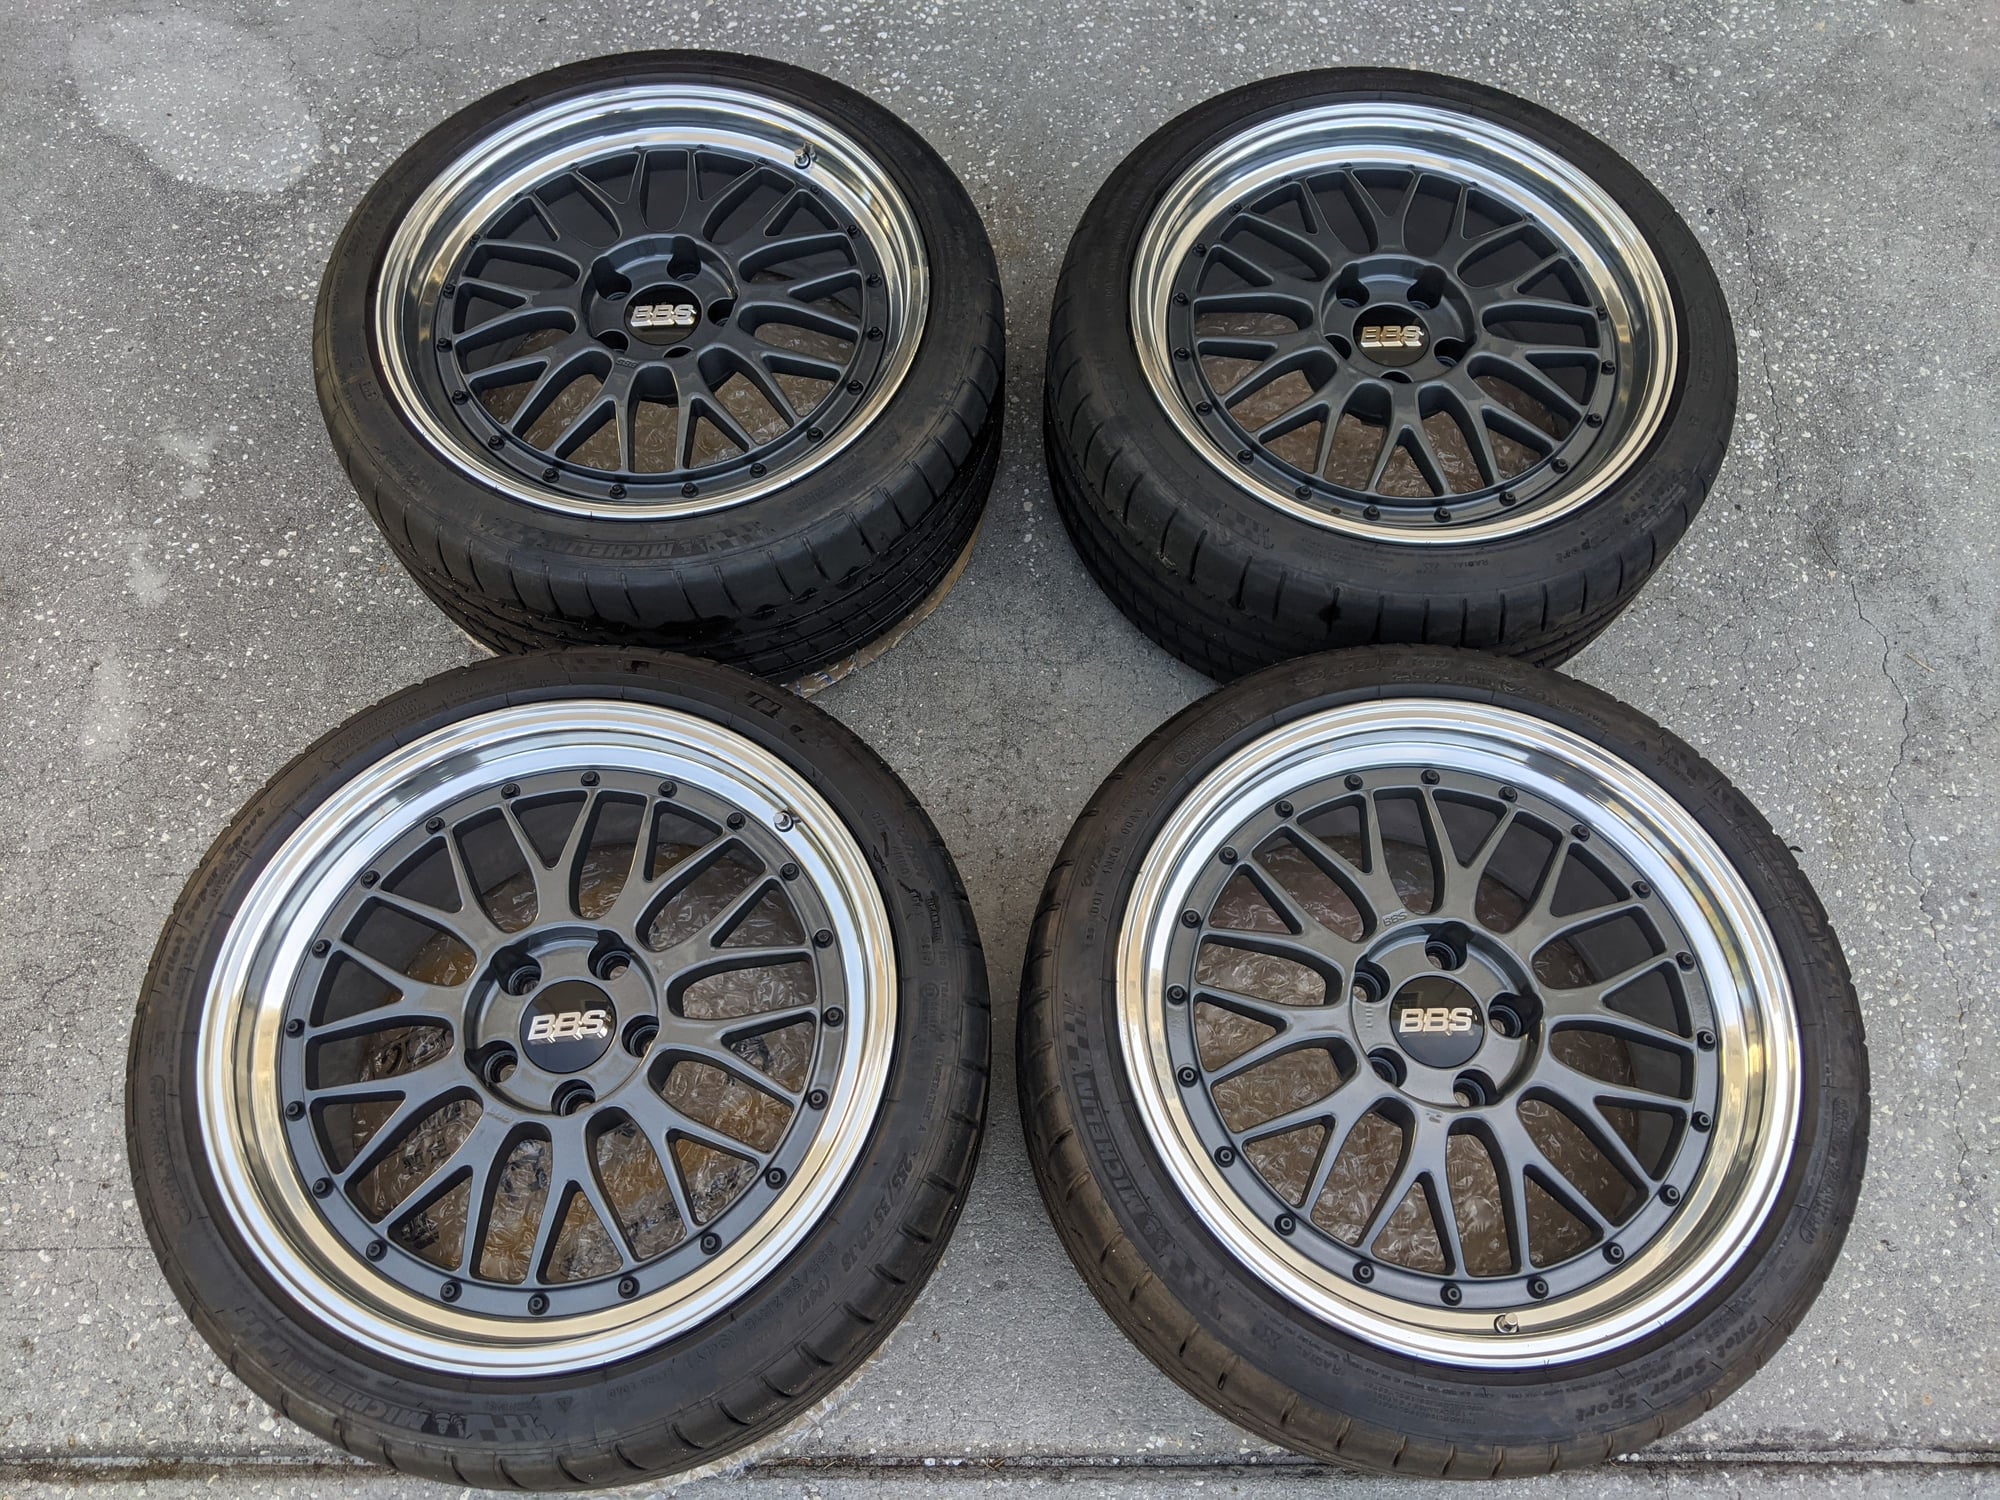 Wheels and Tires/Axles - 18" BBS LM wheels - 5x114.3 - 18x8.5 - 18x9.5 - Used - All Years Any Make All Models - Tarpon Springs, FL 34689, United States